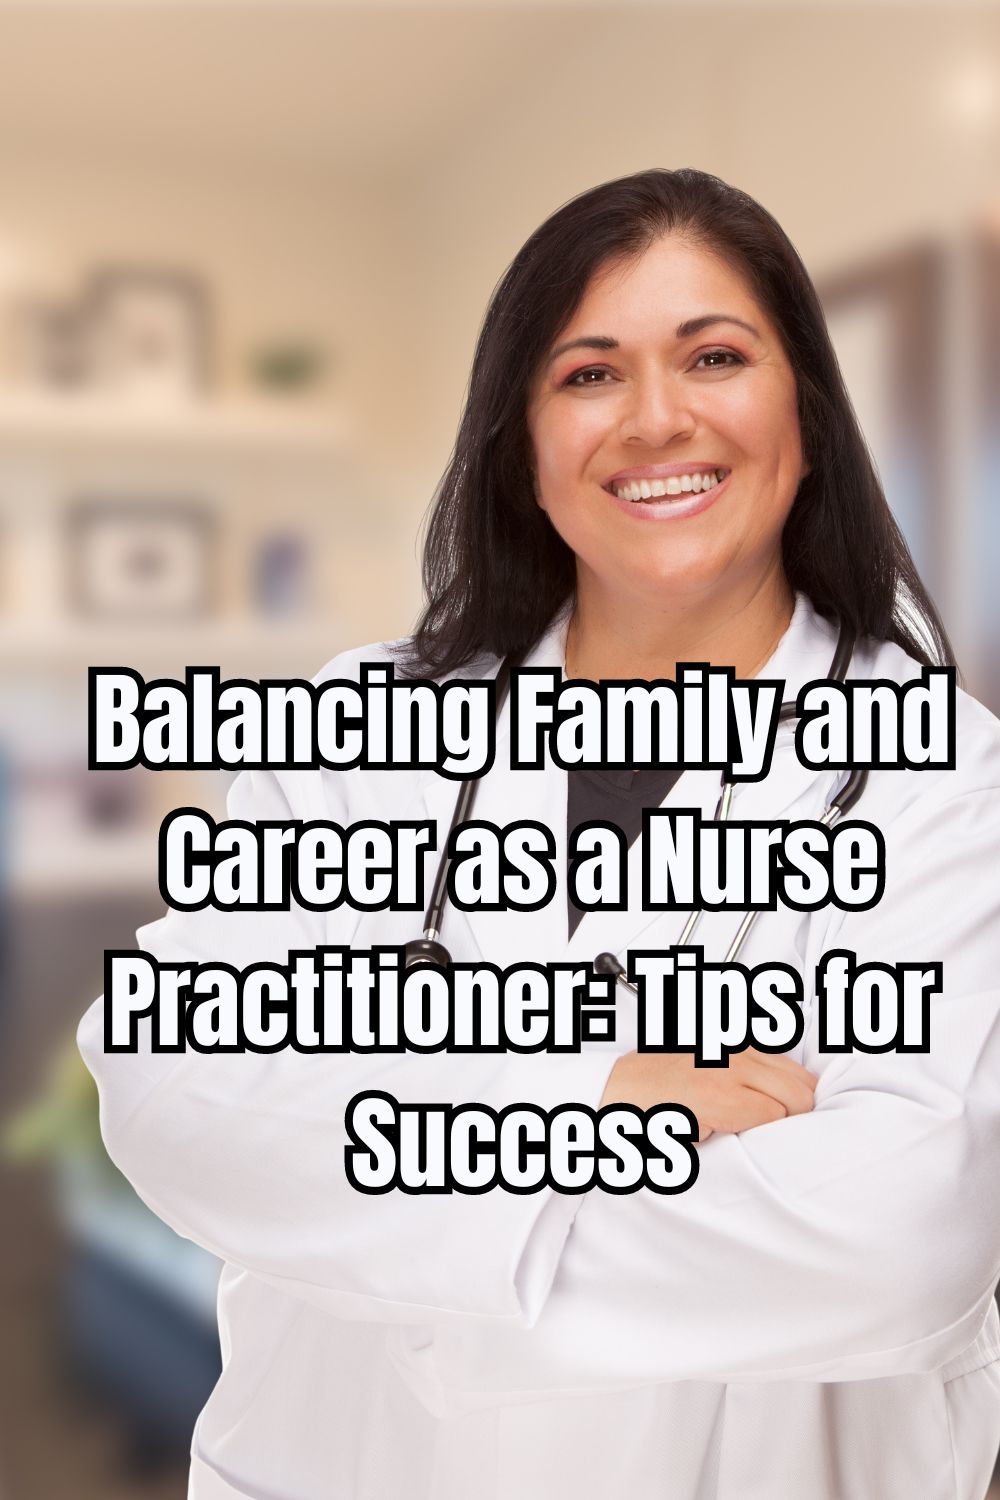 Balancing Family and Career as a Nurse Practitioner Tips for Success